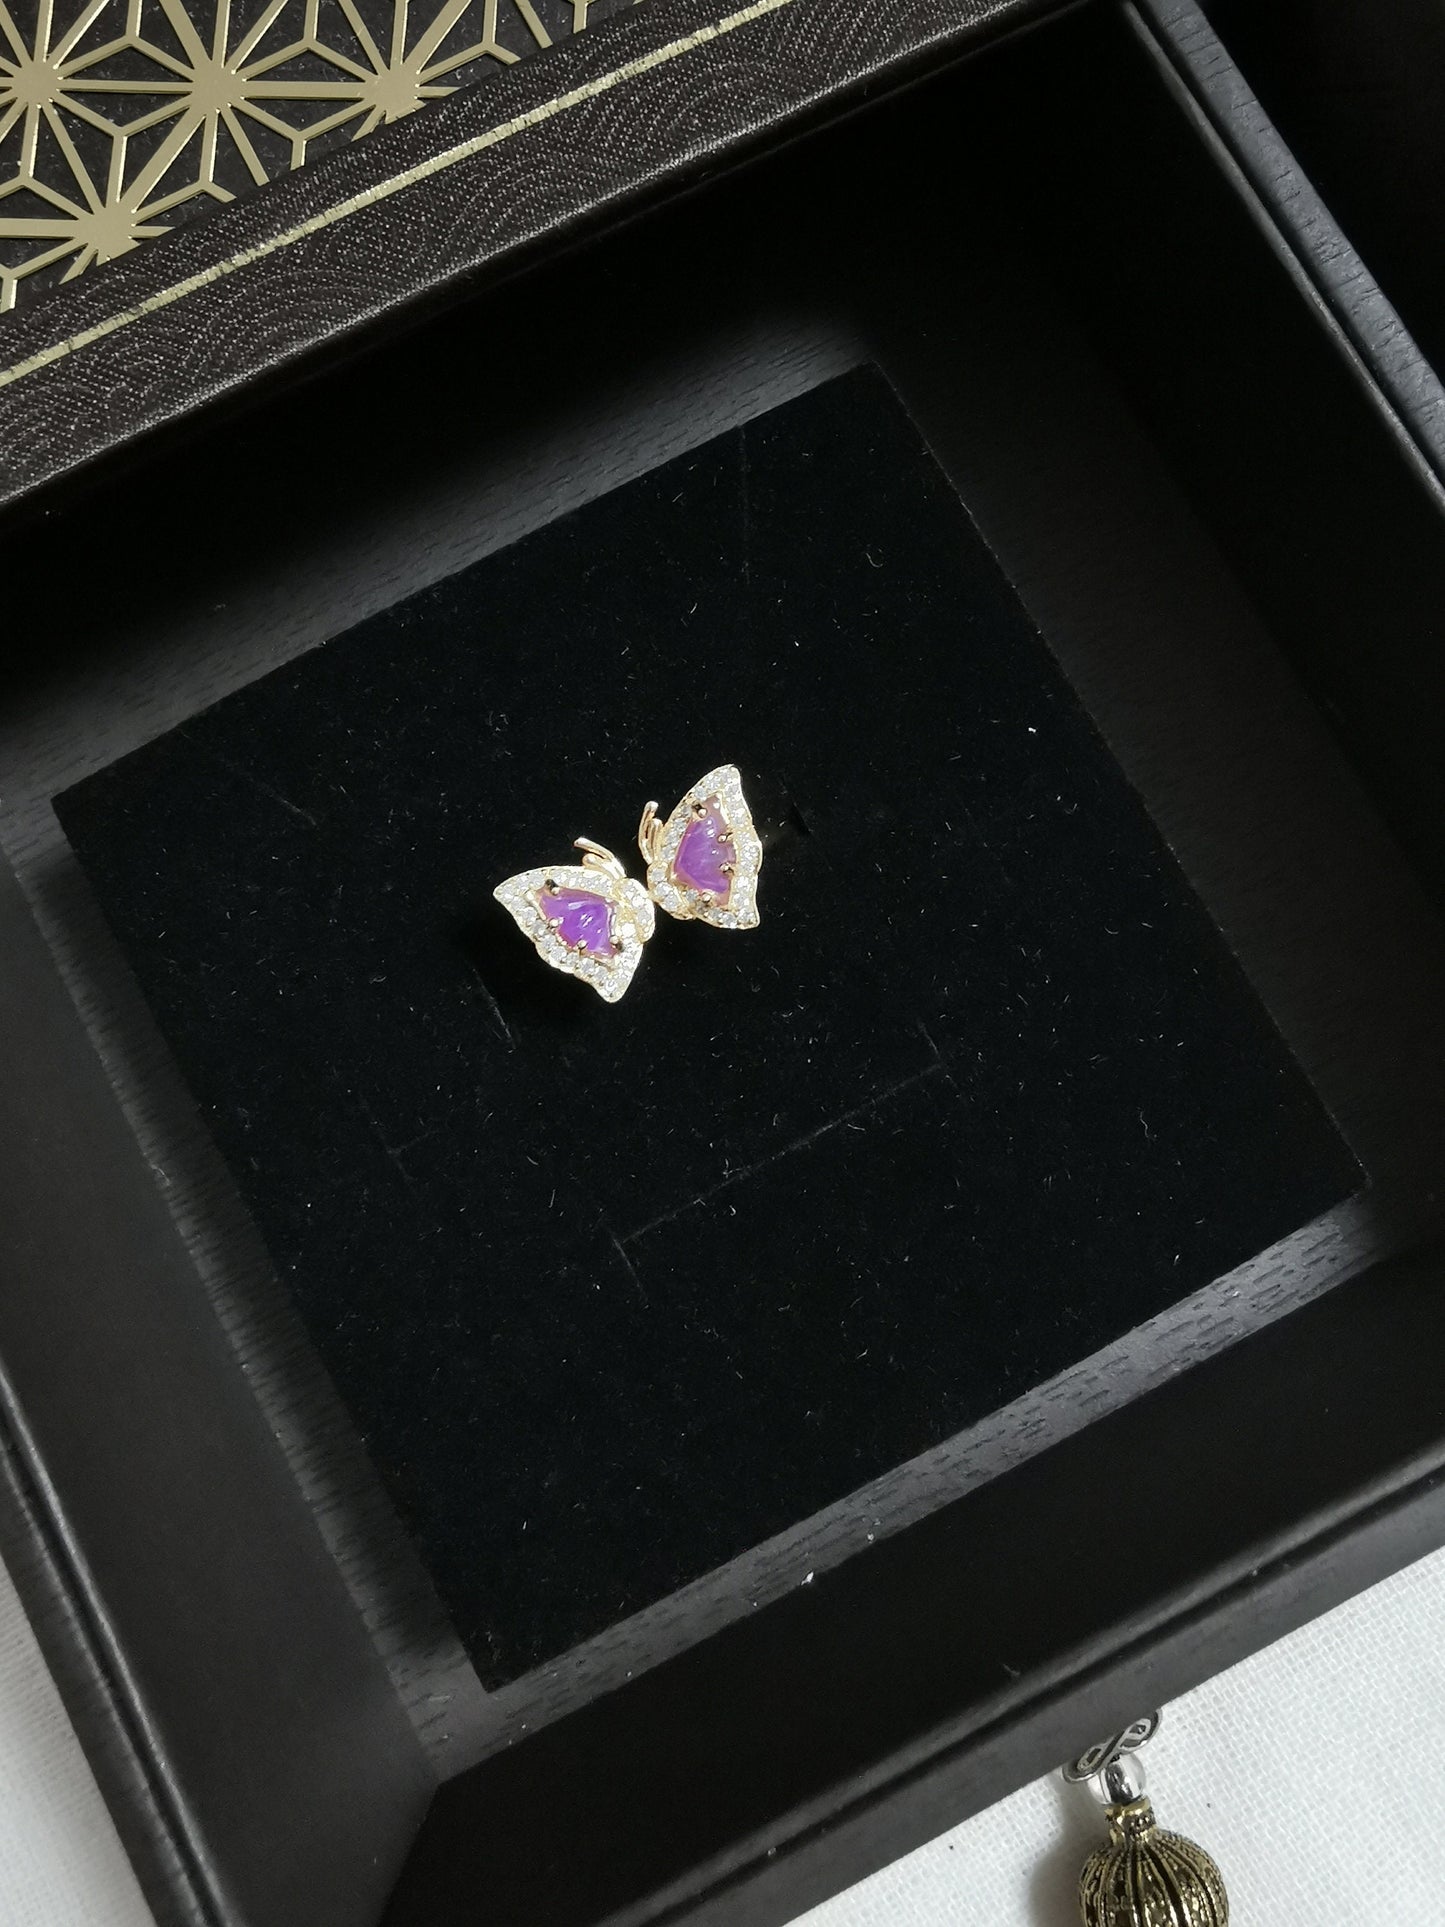 Natural Sugilite Rare Translucent Pink Gold Butterfly Adjustable Ring